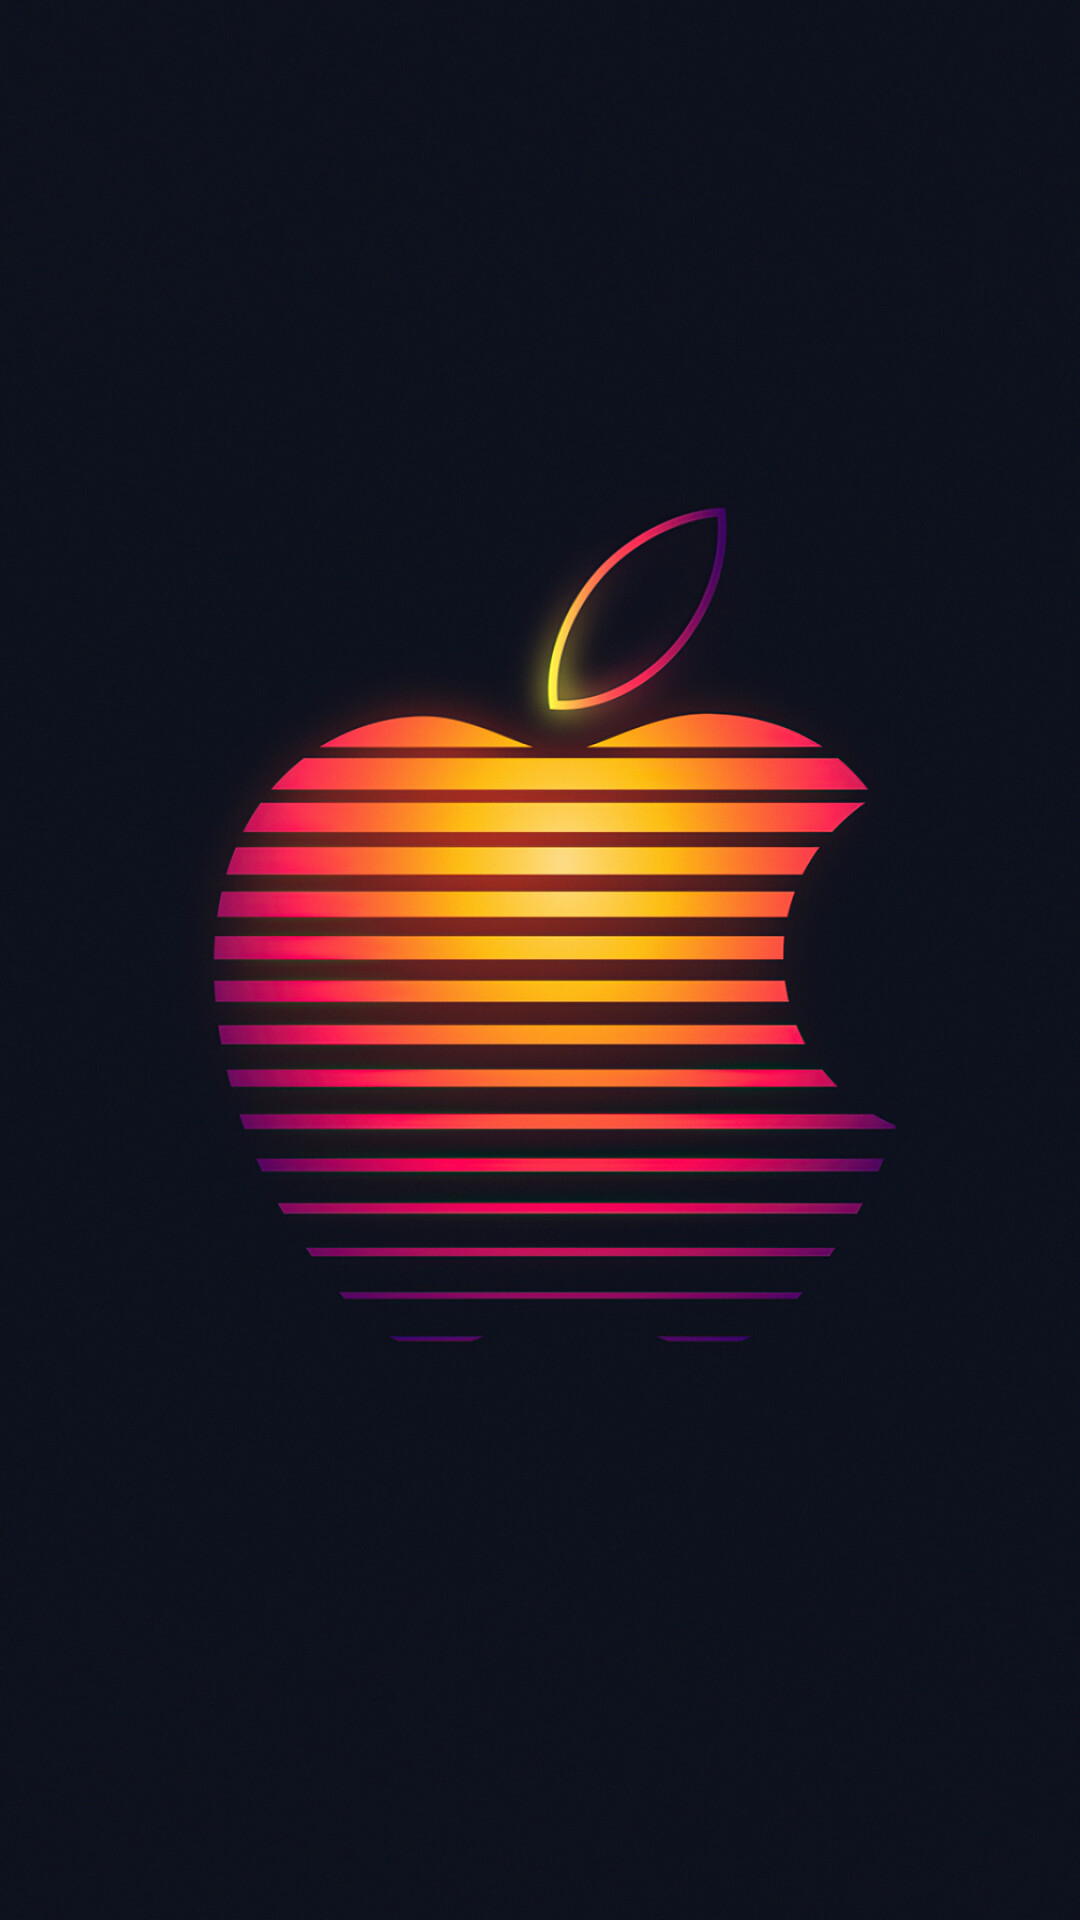 Apple Logo: An American technology company founded by Steve Jobs. 1080x1920 Full HD Background.